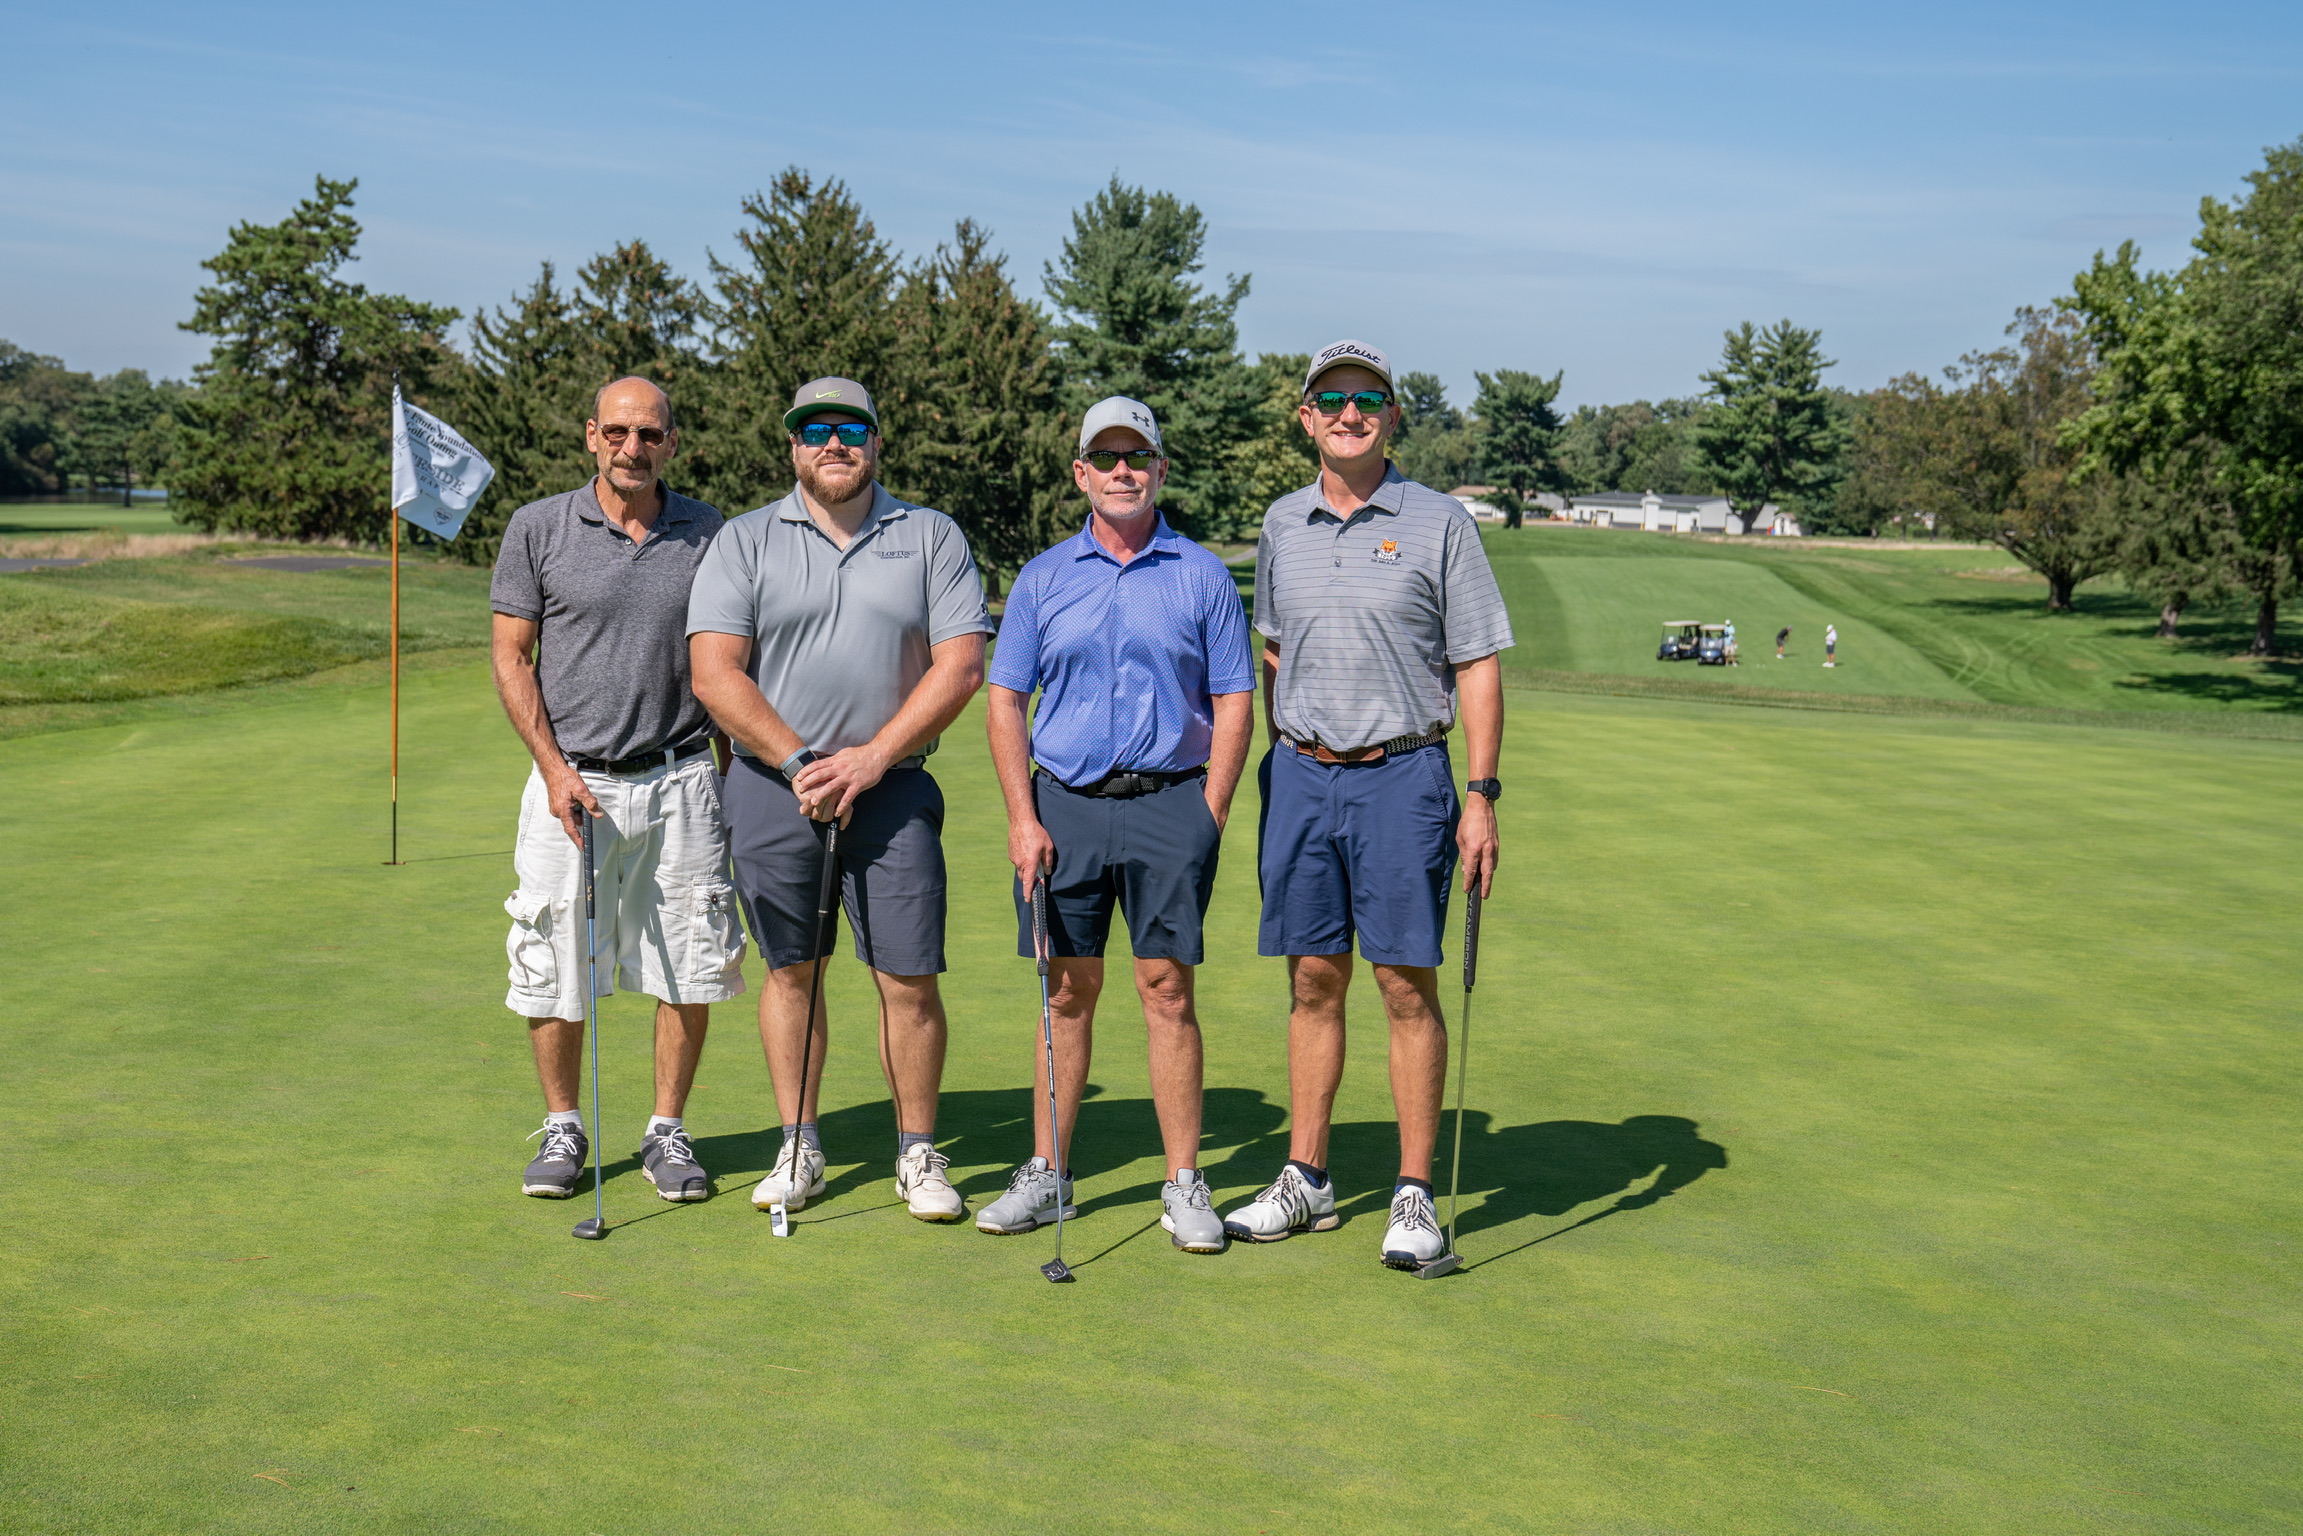 2021 Golf Outing Group Photo On Green